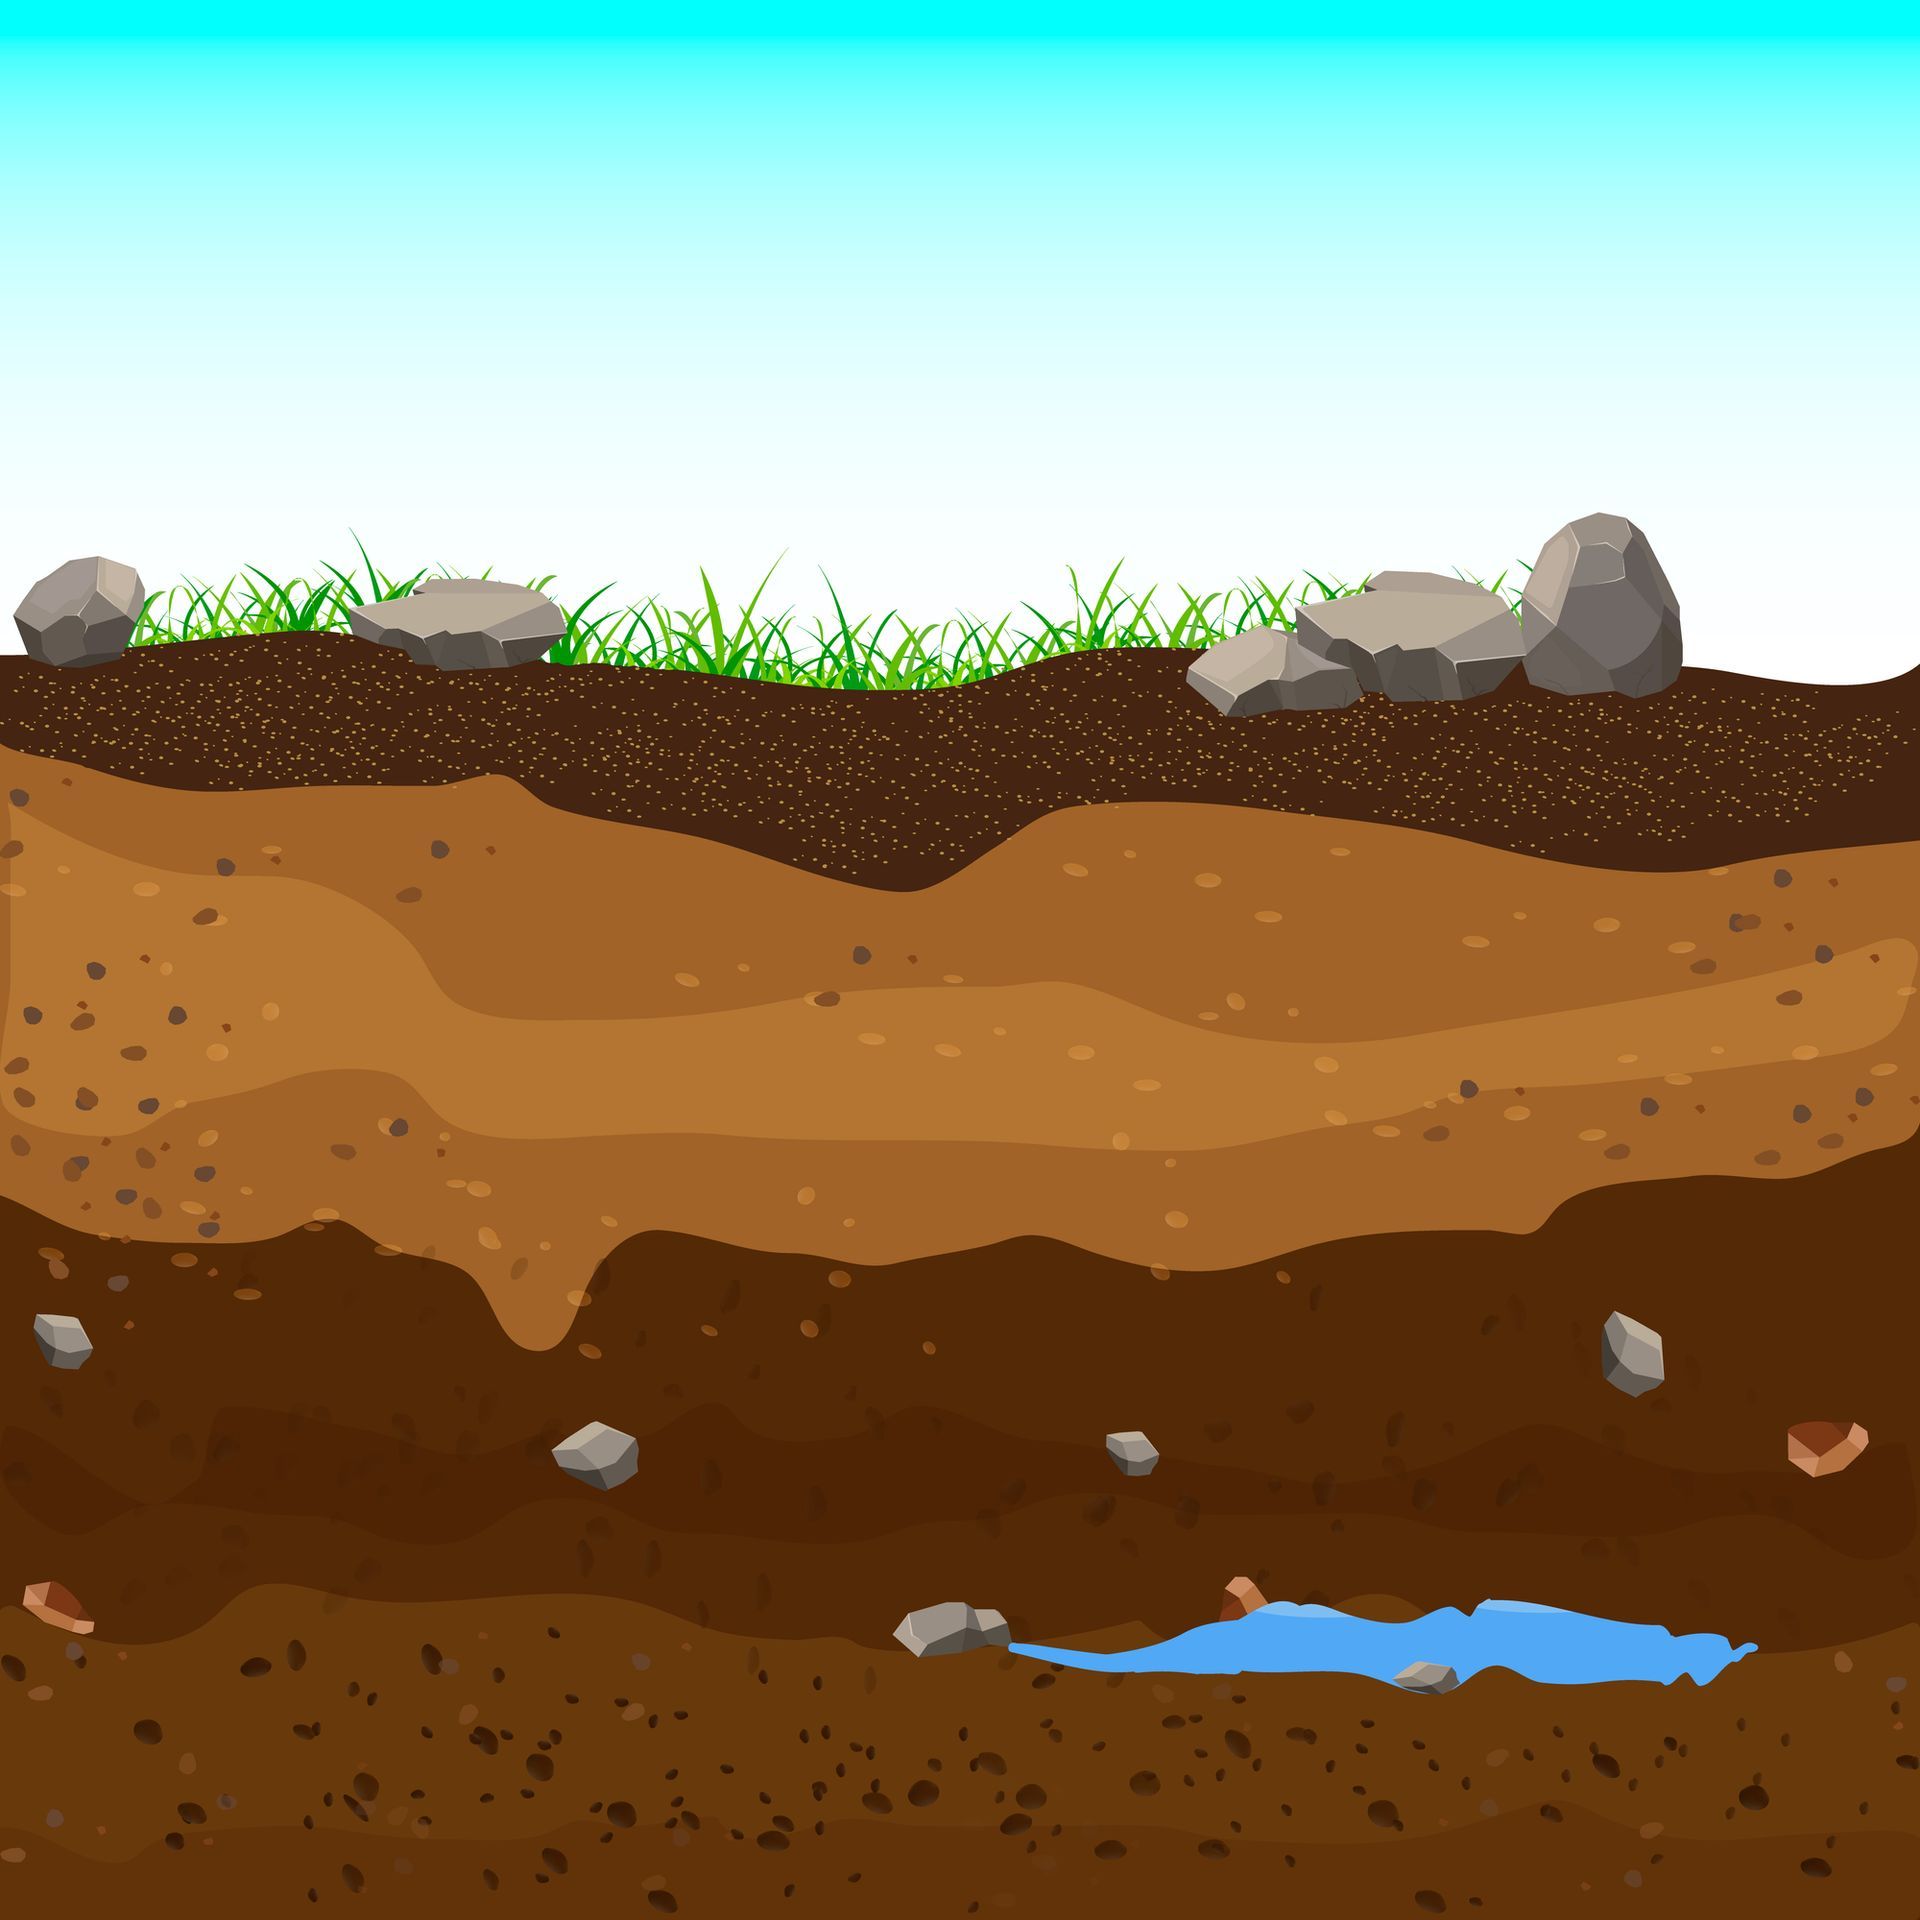 Groundwater Can Cause Basement Flooding: Prevention and Remediation